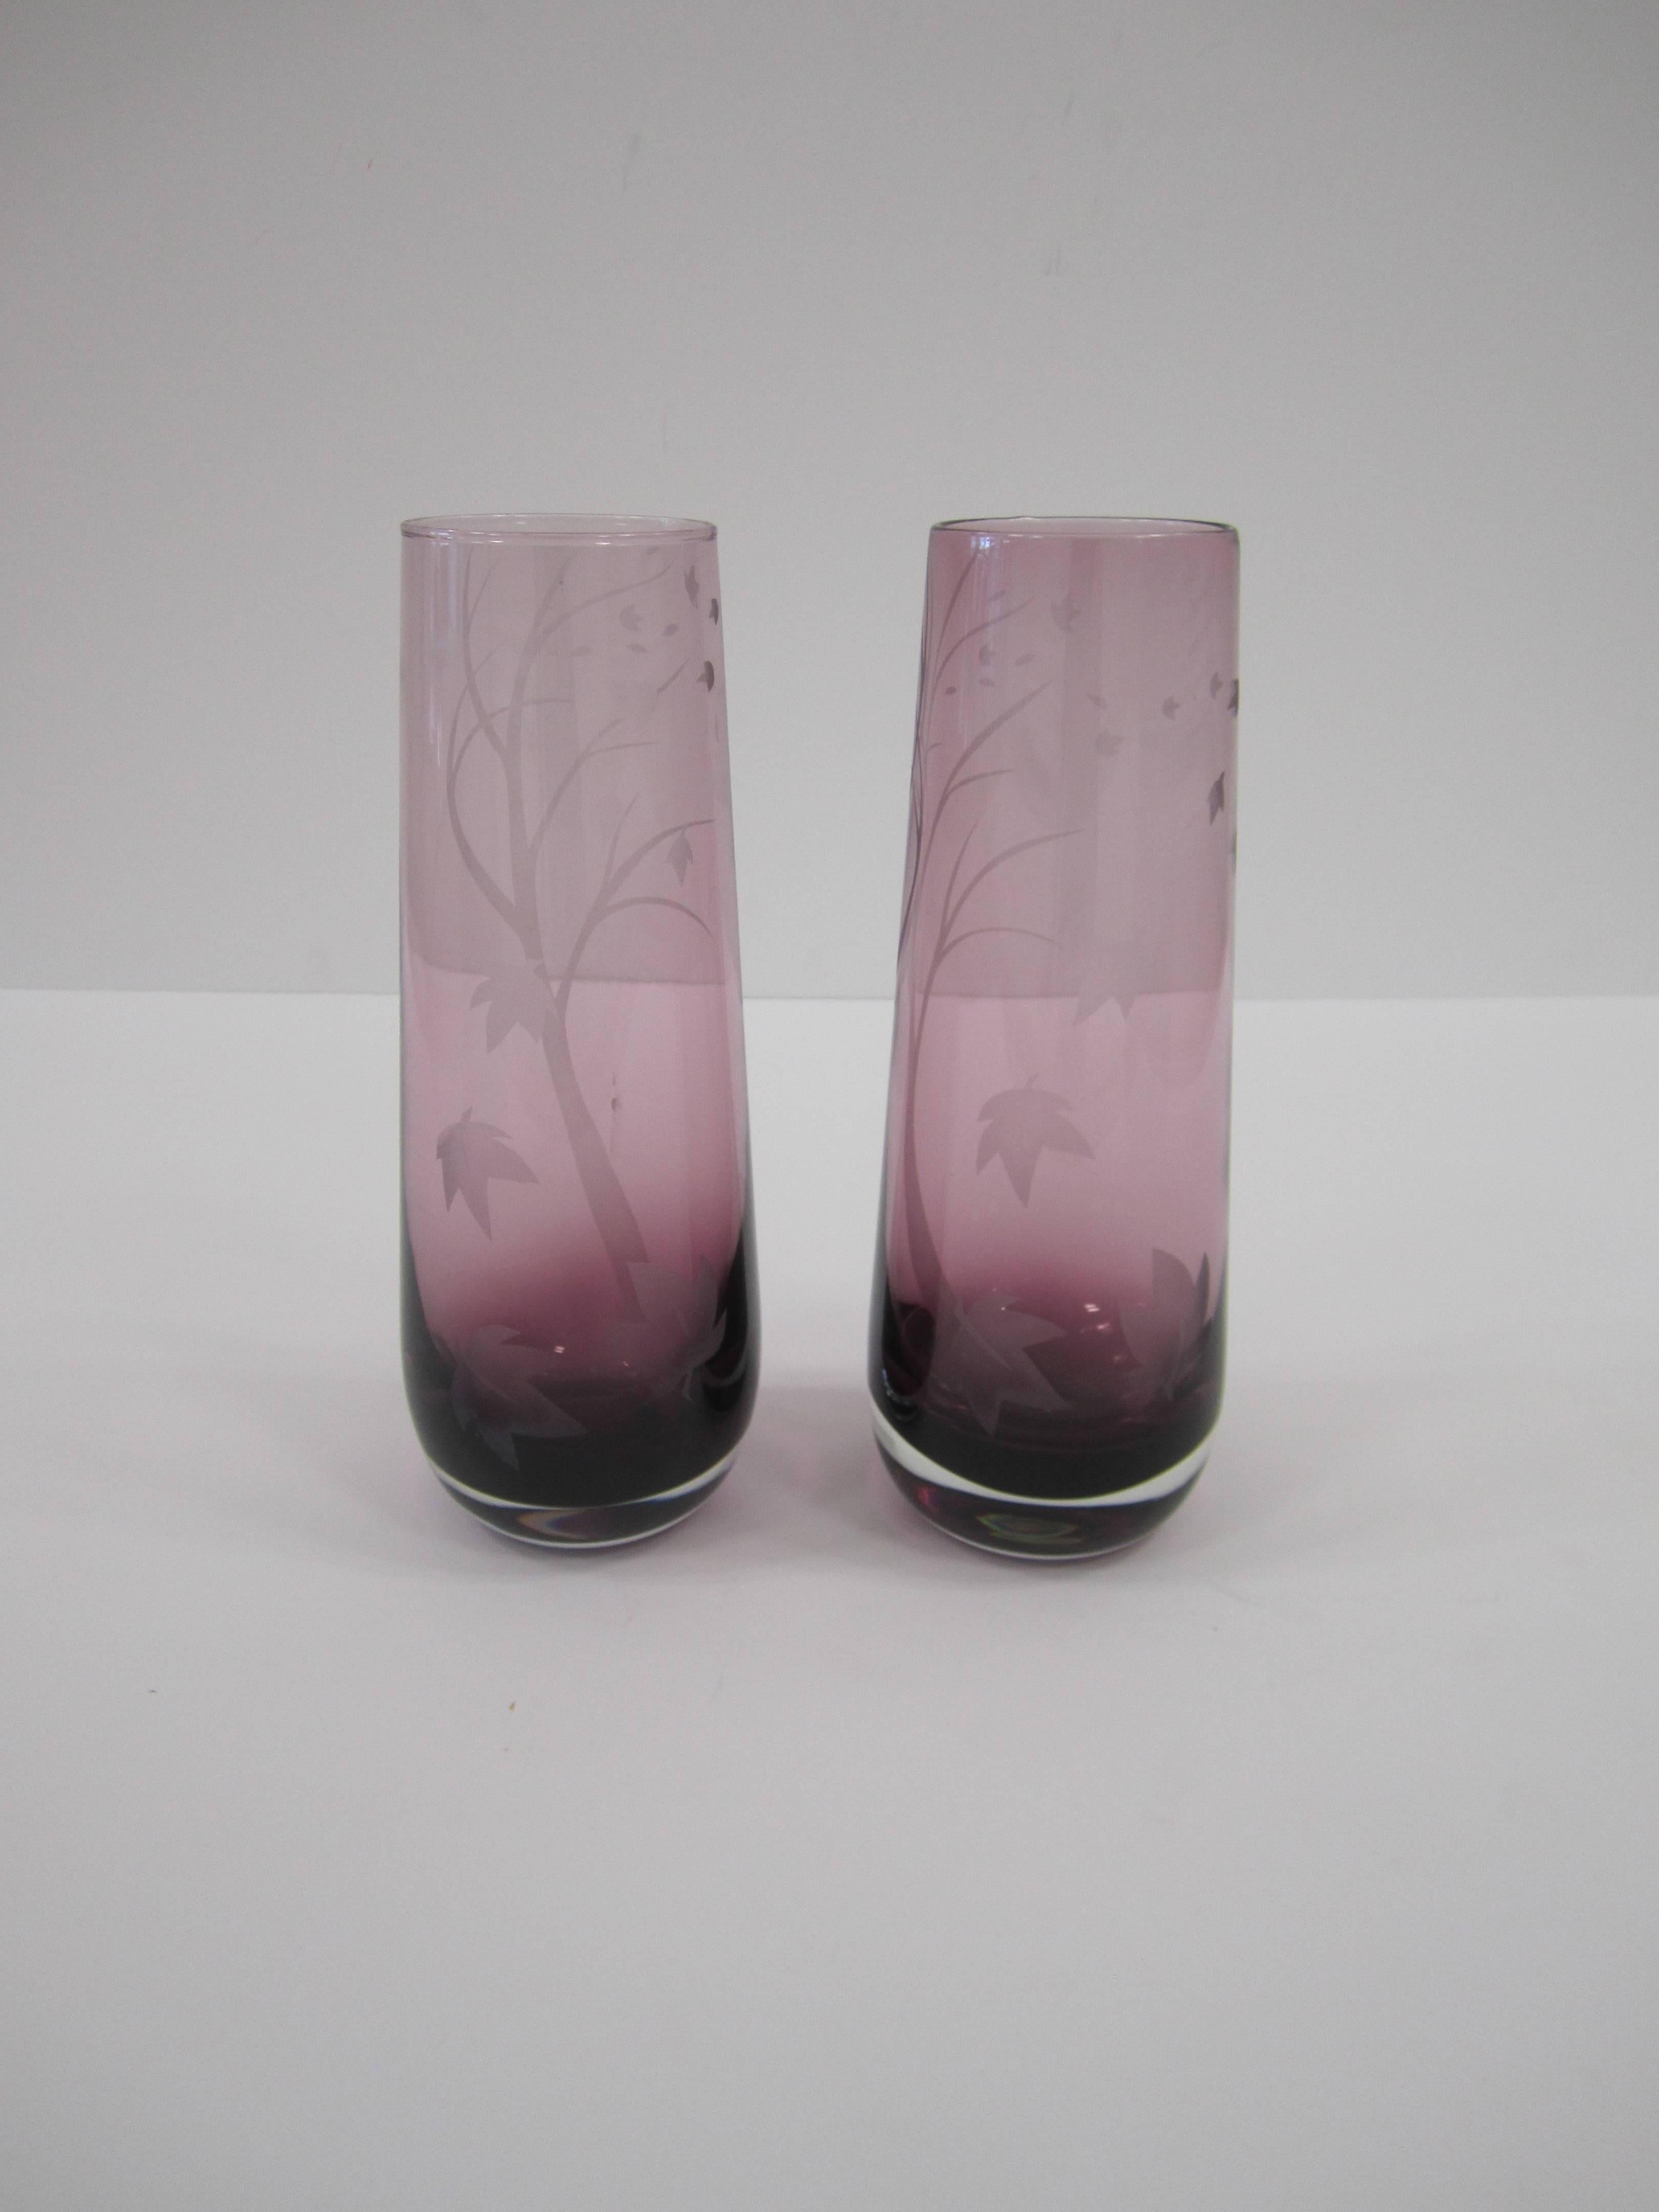 Etched Purple Amethyst Art Glass Vases, 1980s, Pair and Signed